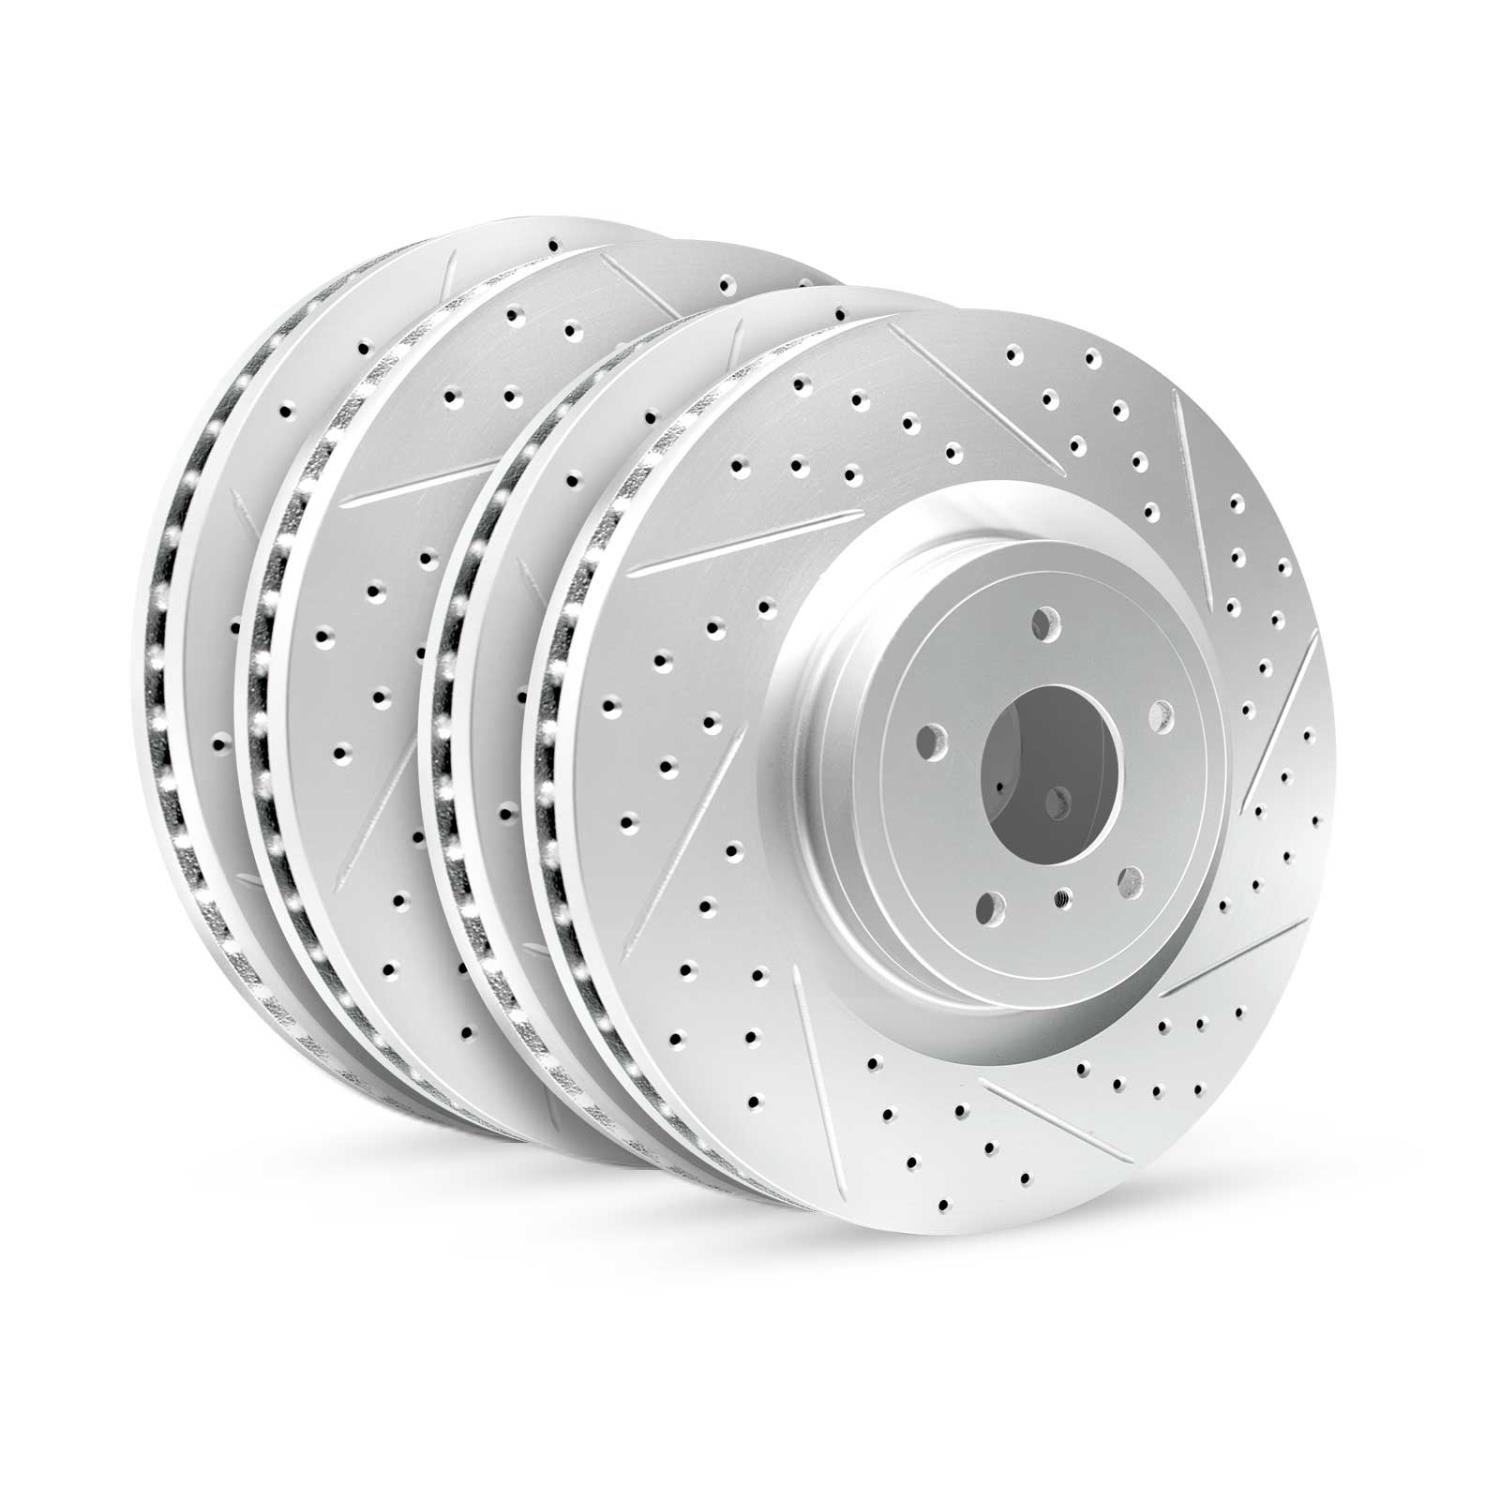 GEO-Carbon Drilled/Slotted Rotors, 1994-1999 Infiniti/Nissan, Position: Front/Rear